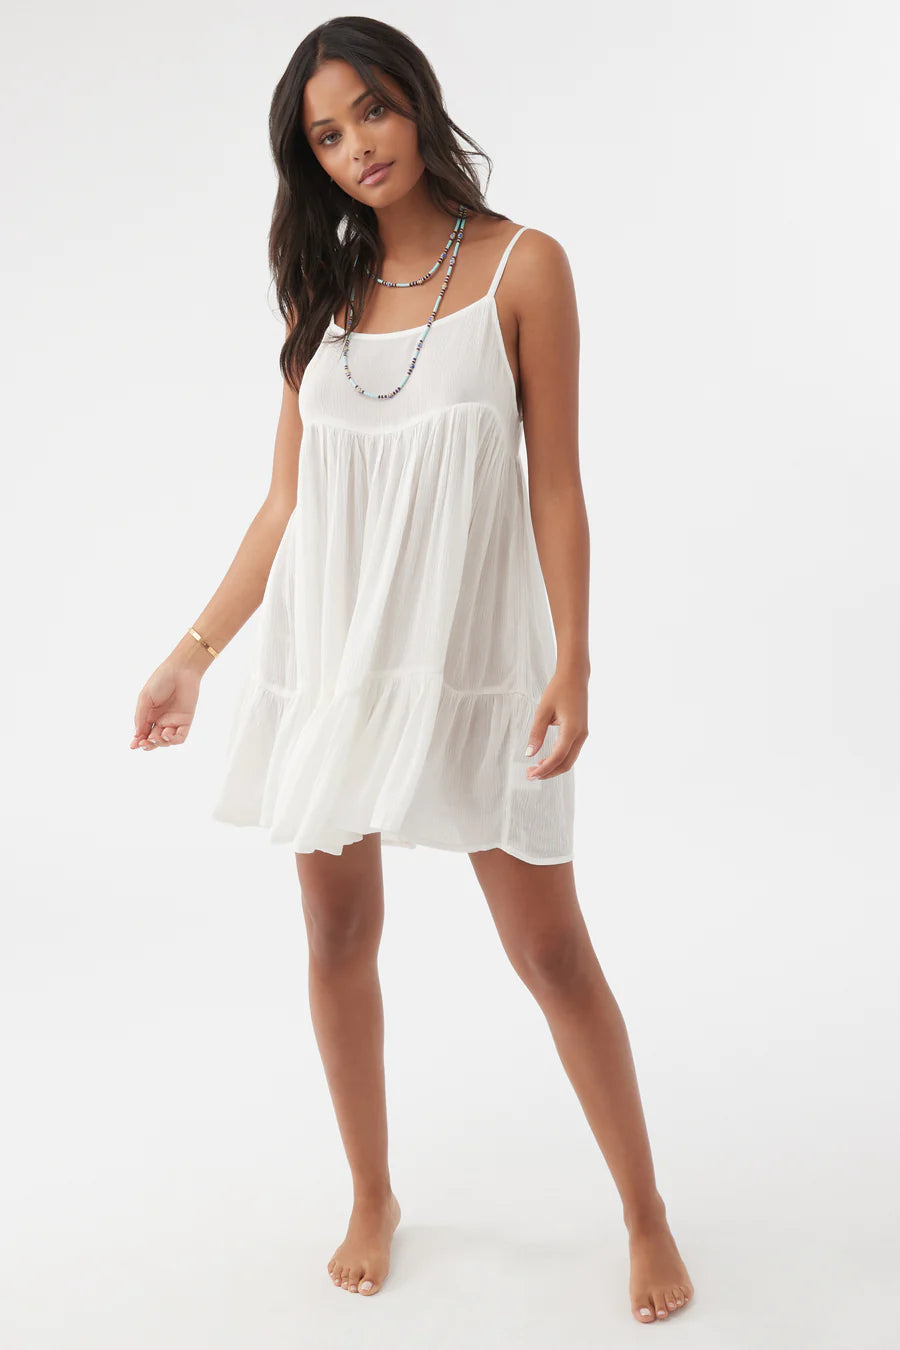 O'Neill Saltwater Solids Rilee Coverup Dress